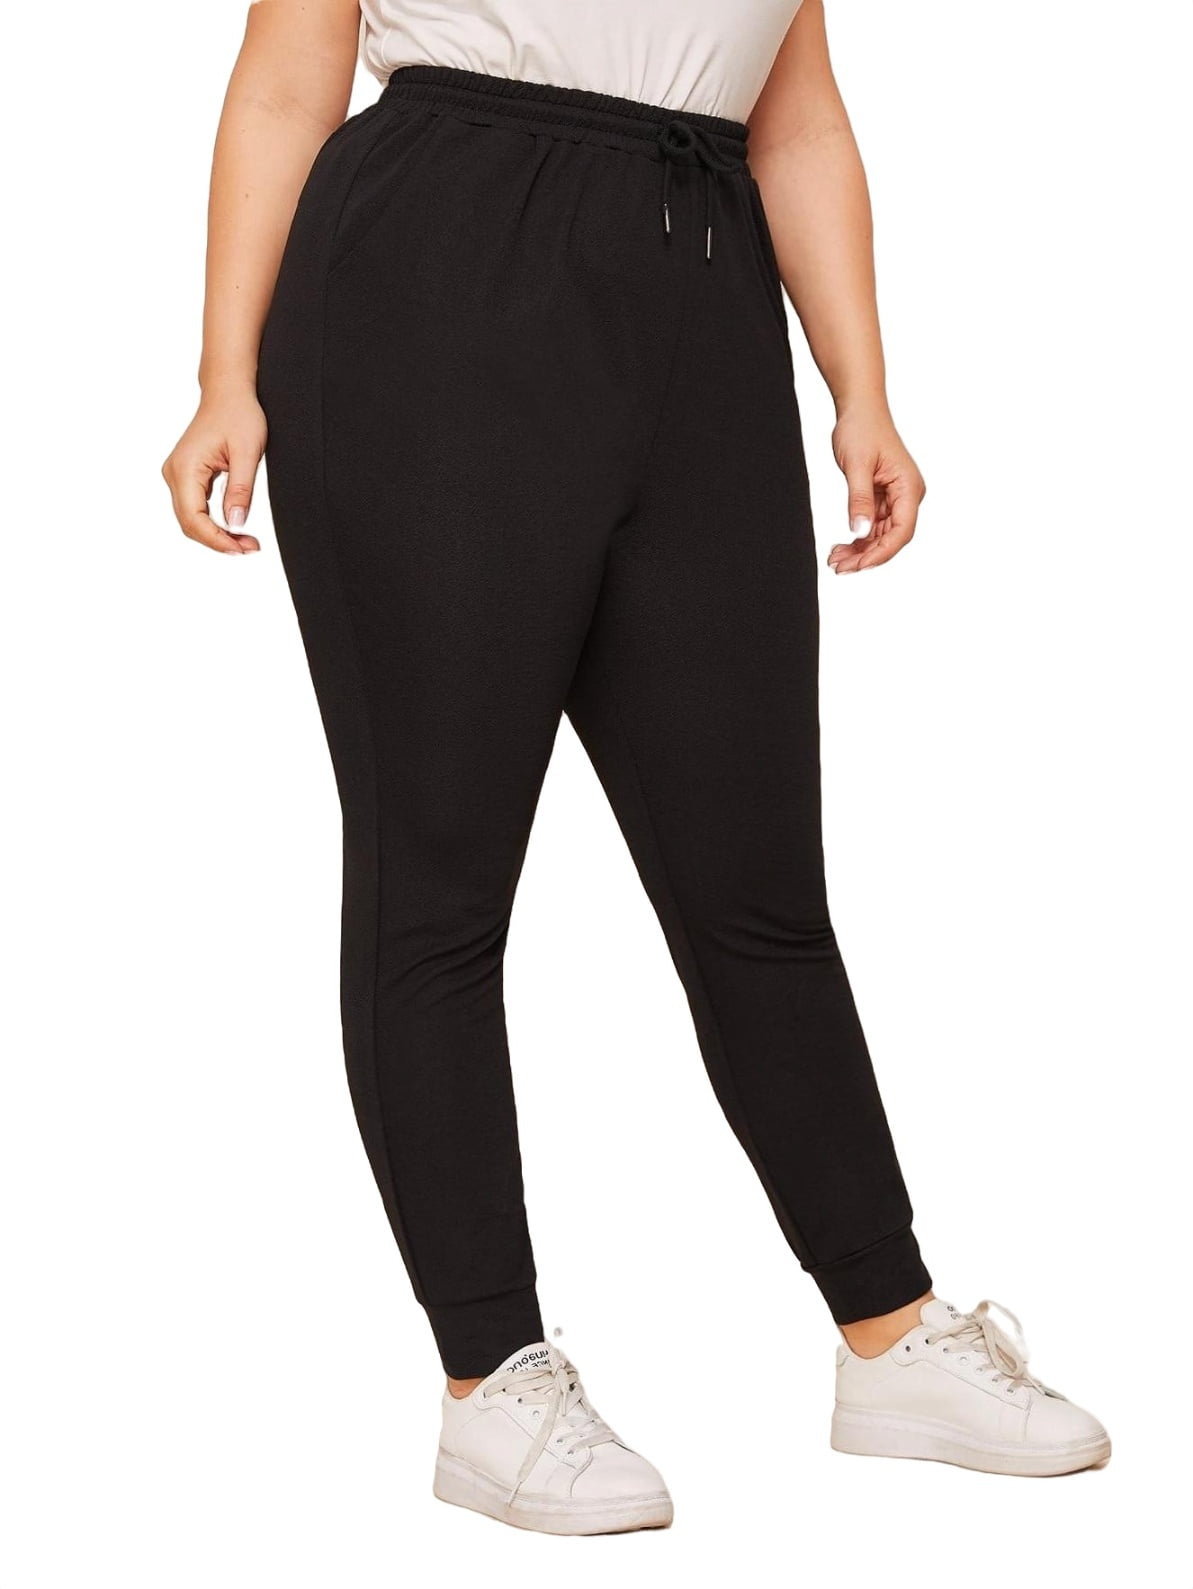 Women's Plus Size Solid High Waisted Stretchy Straight Leg Pants Long  Trousers 3XL(18)